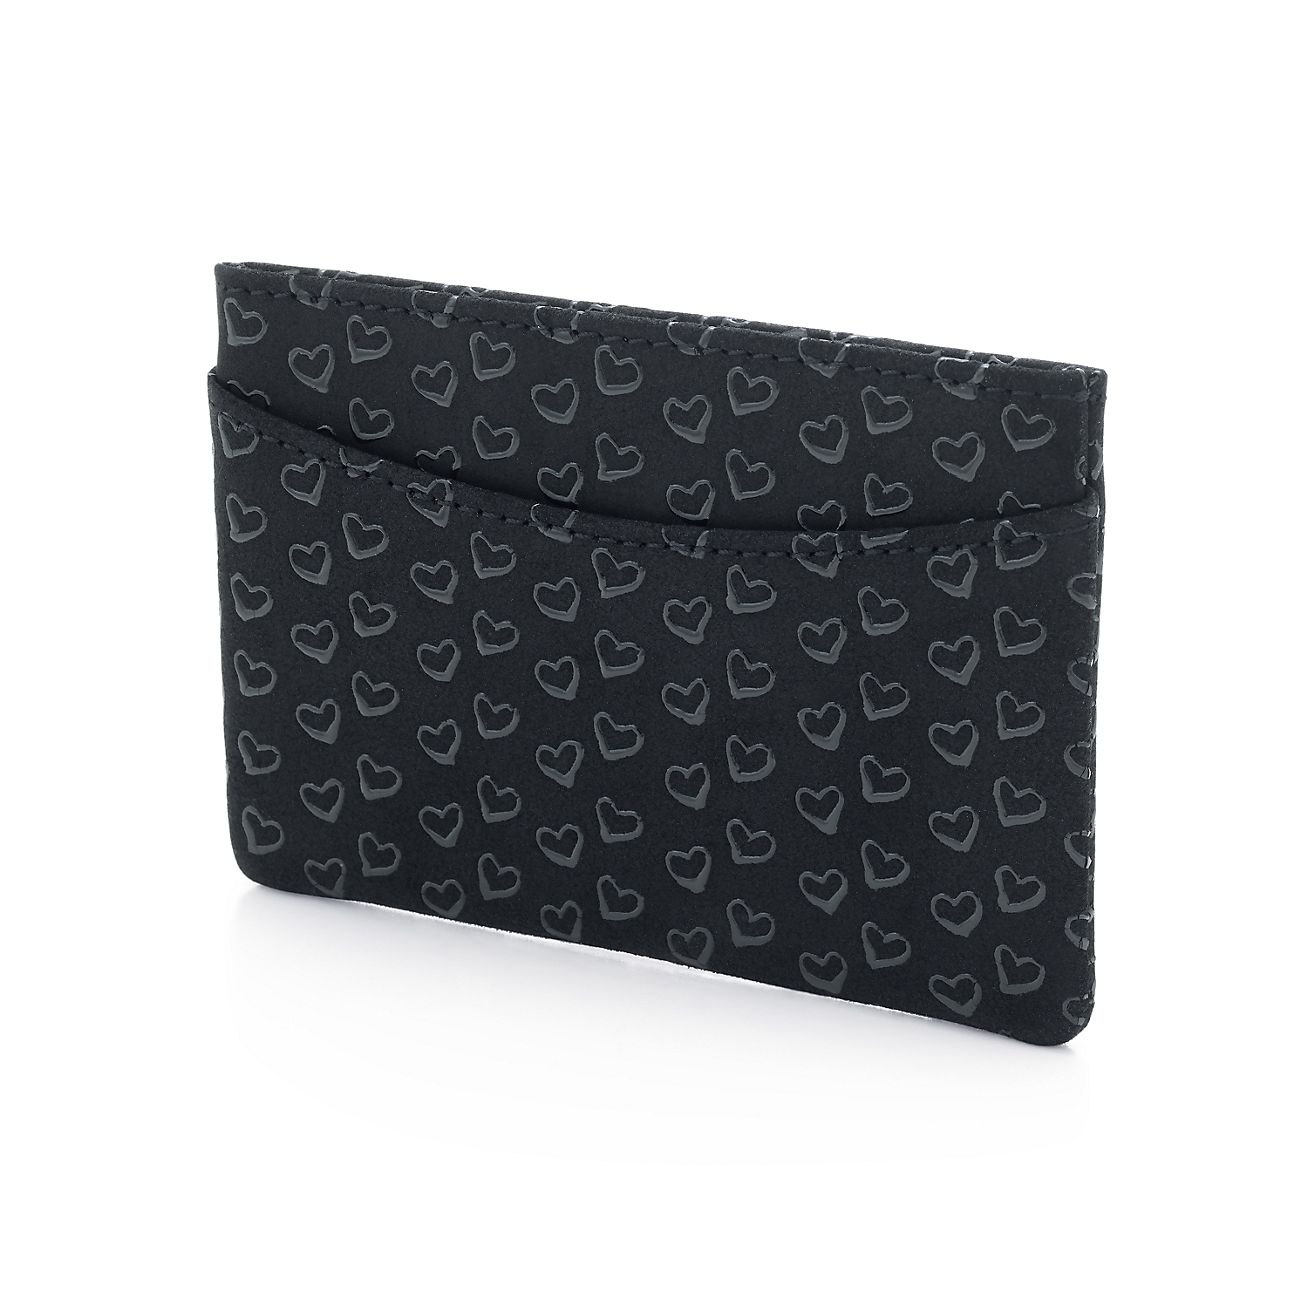 Elsa Peretti® card case in black leather with lacquered Open